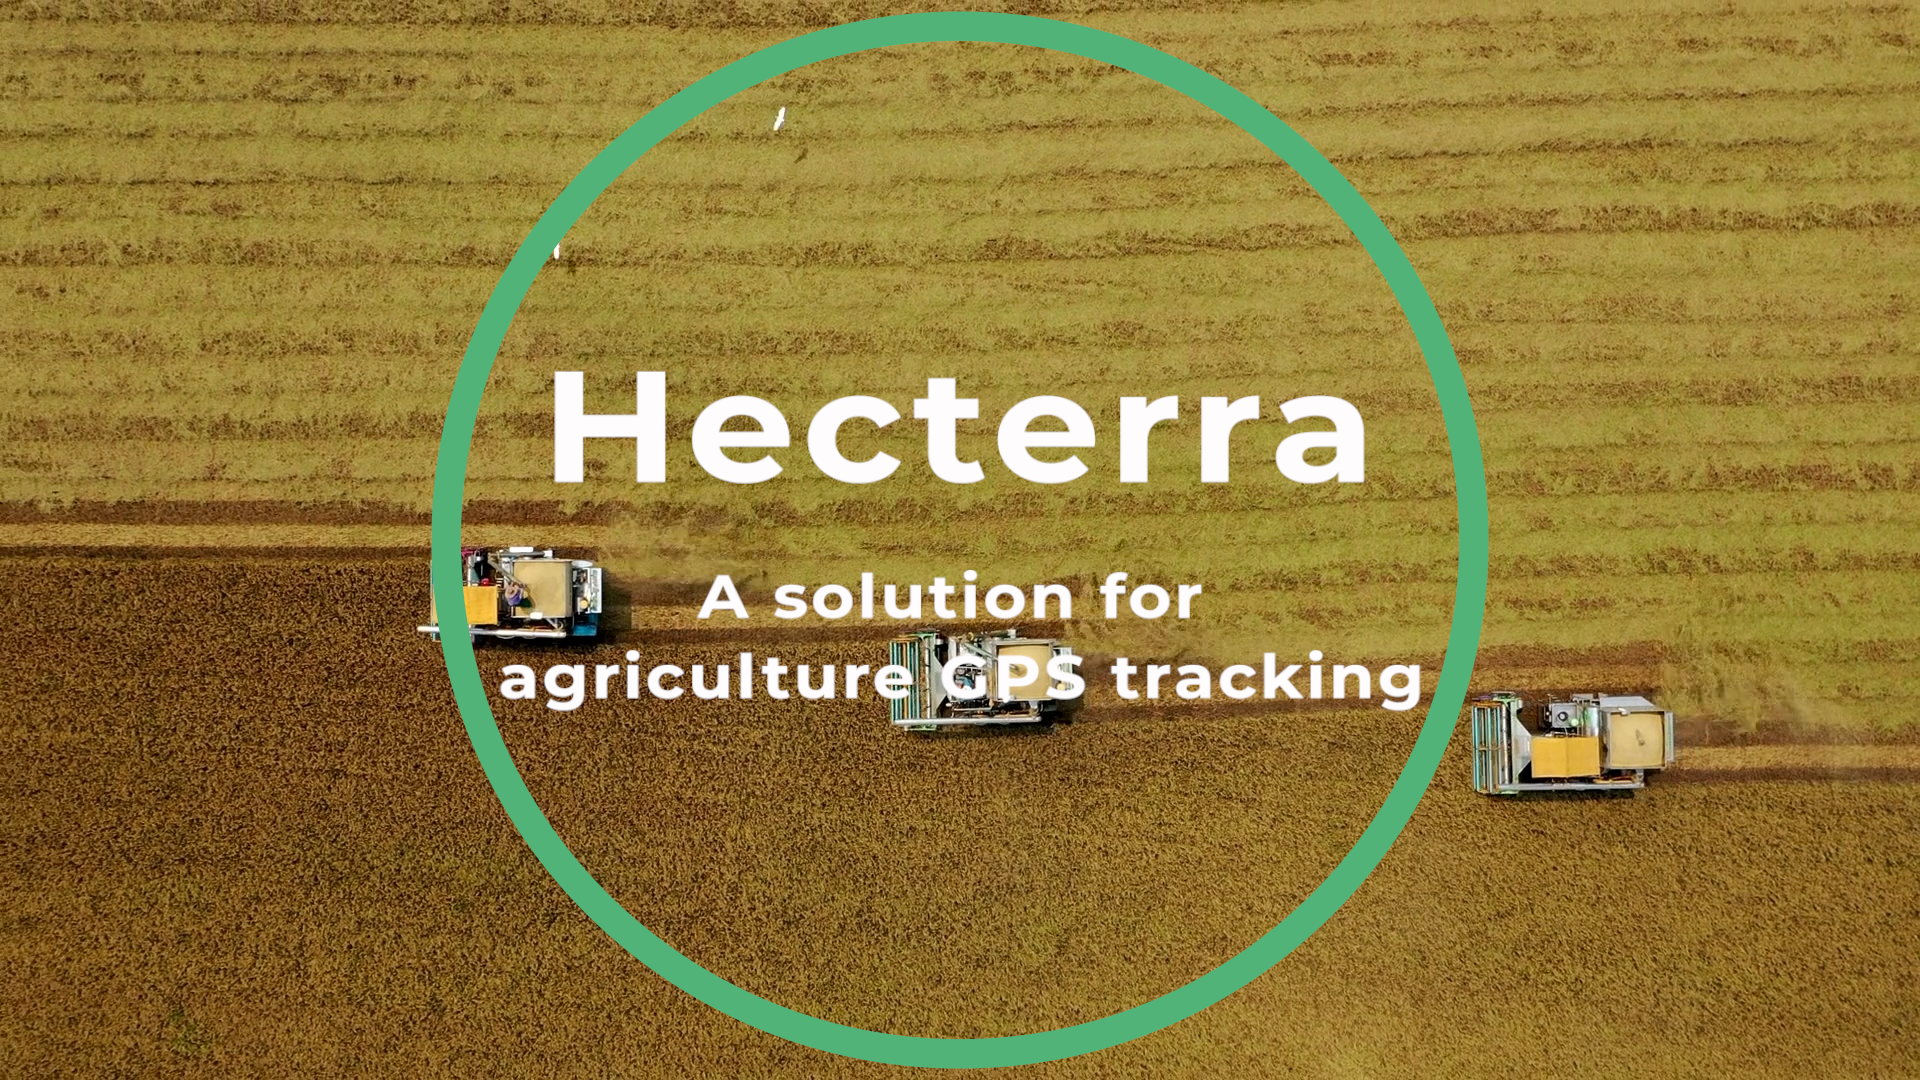 Hecterra - A solution for agriculture GPS tracking